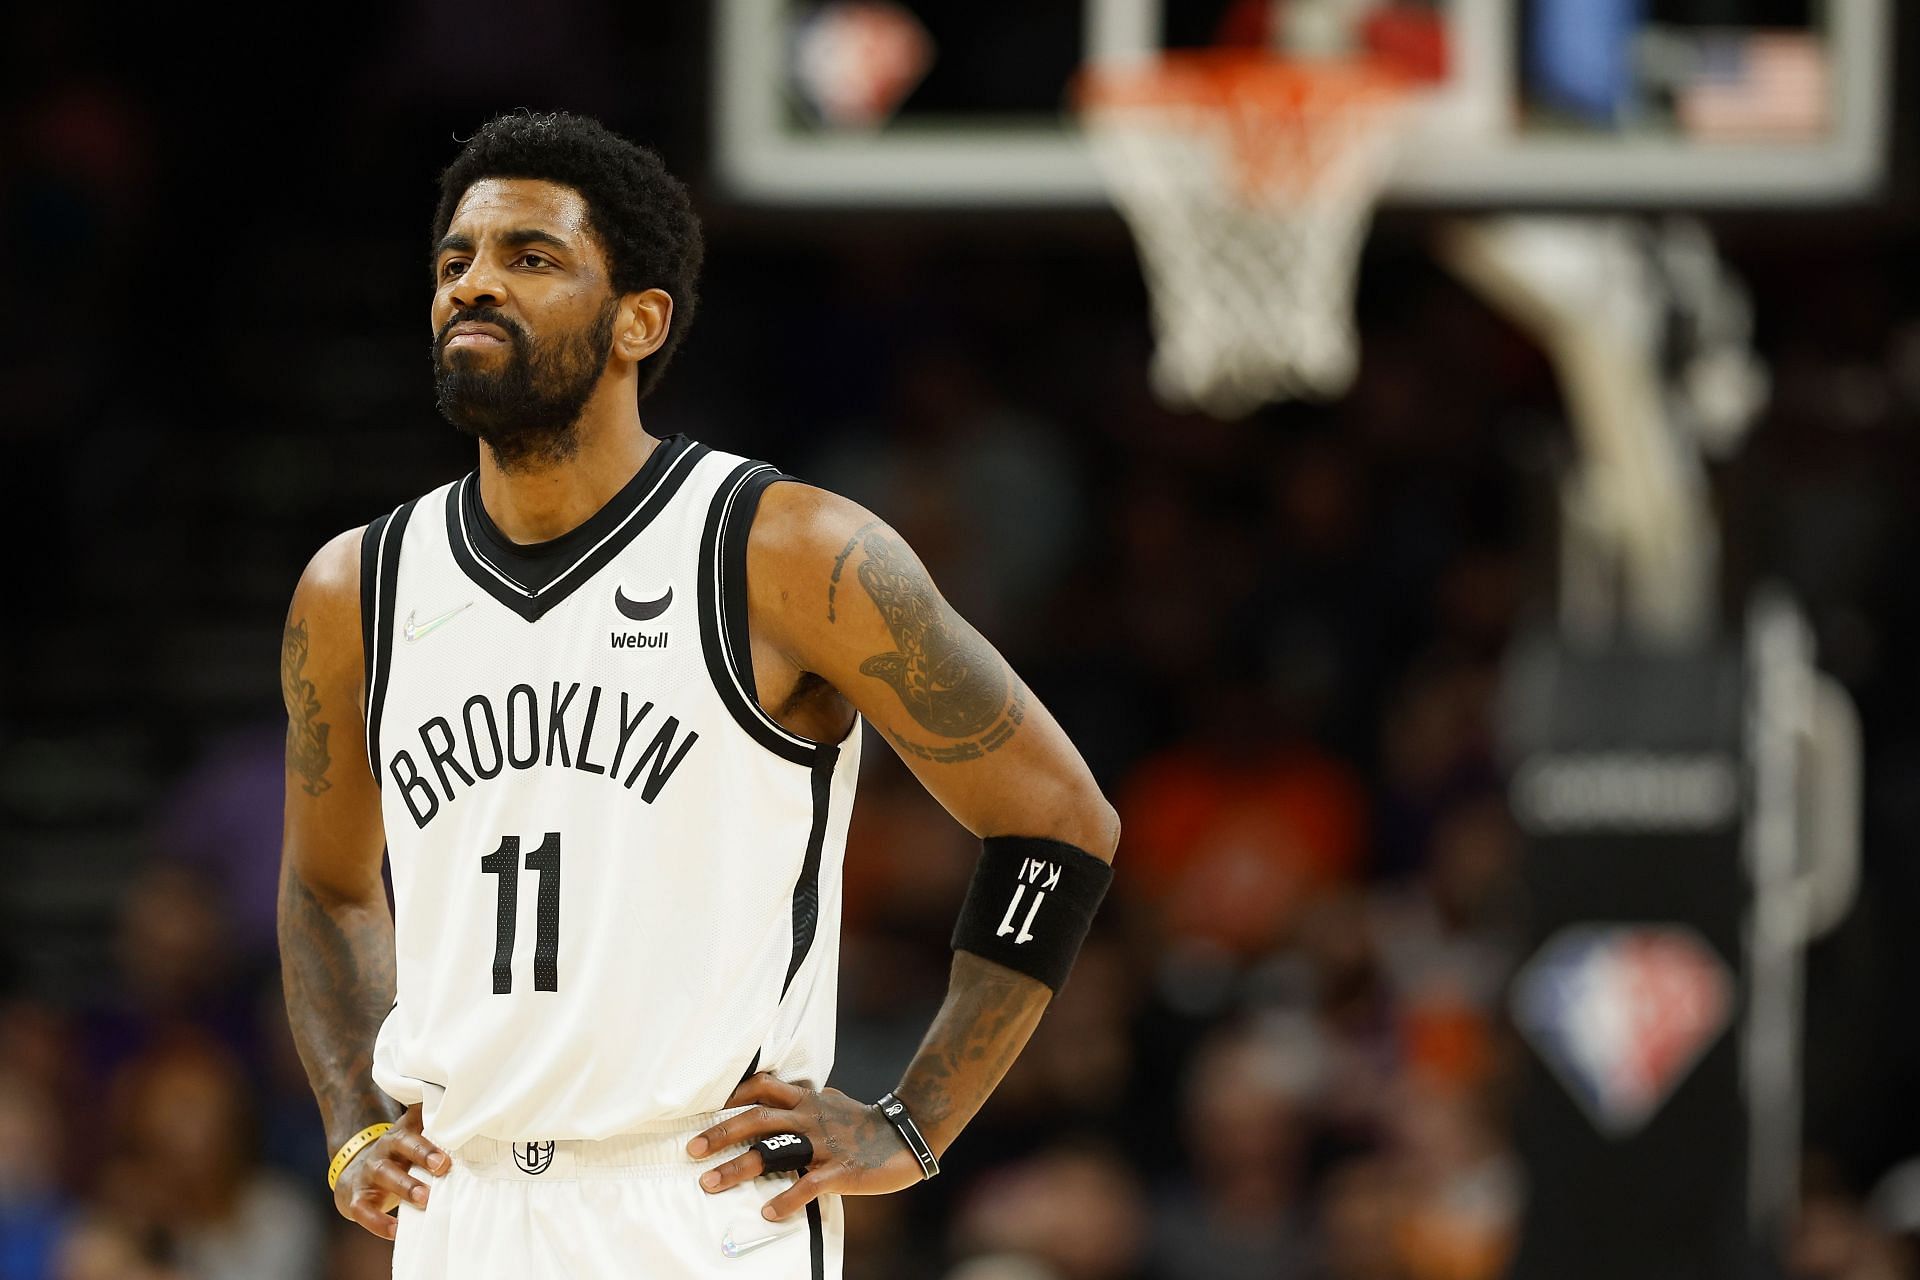 Kyrie Irving of the Brooklyn Nets against the Phoenix Suns